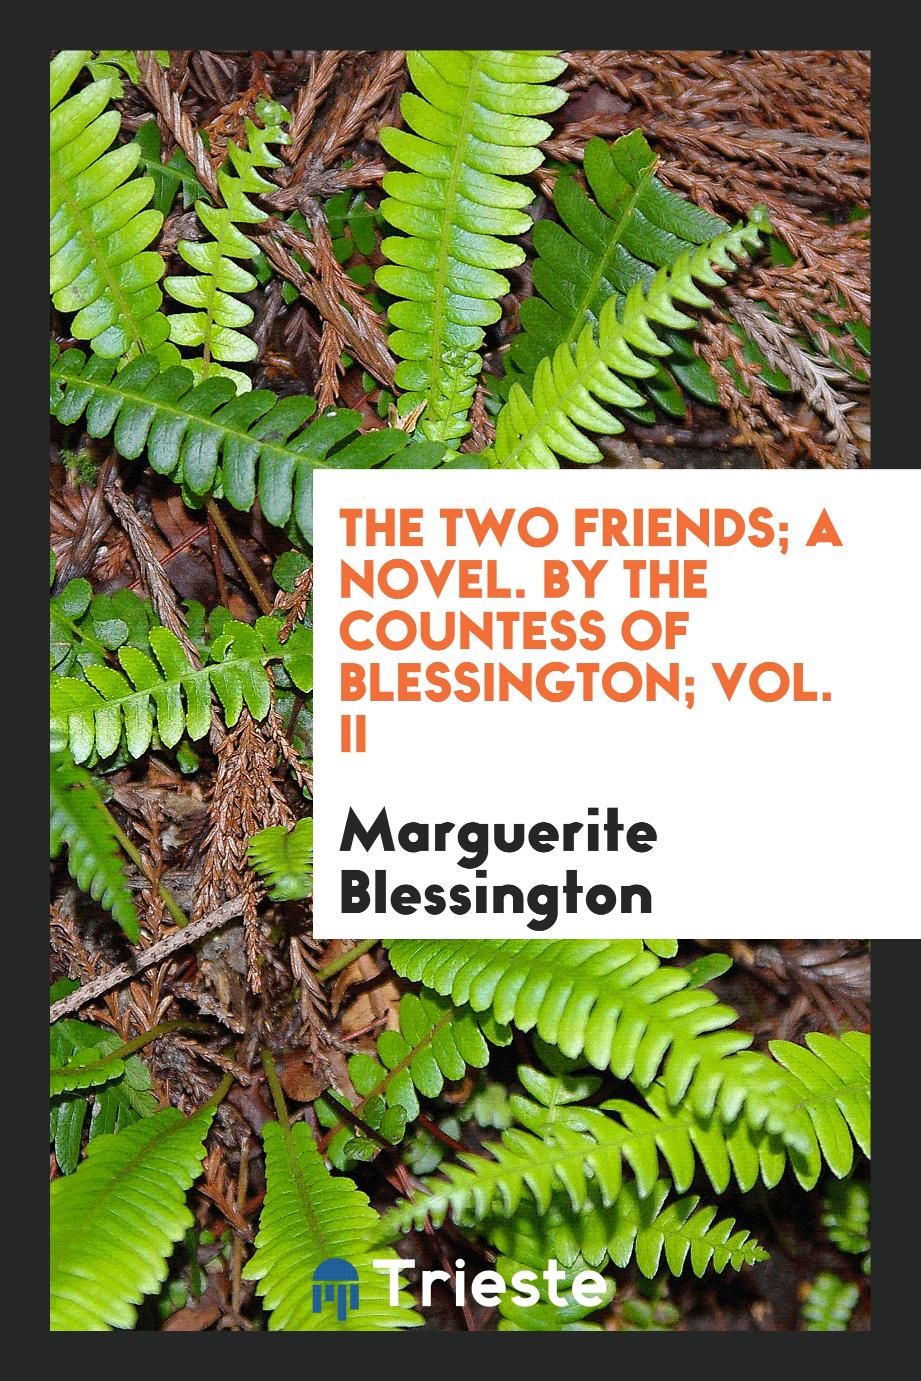 The two friends; a novel. By the countess of blessington; Vol. II